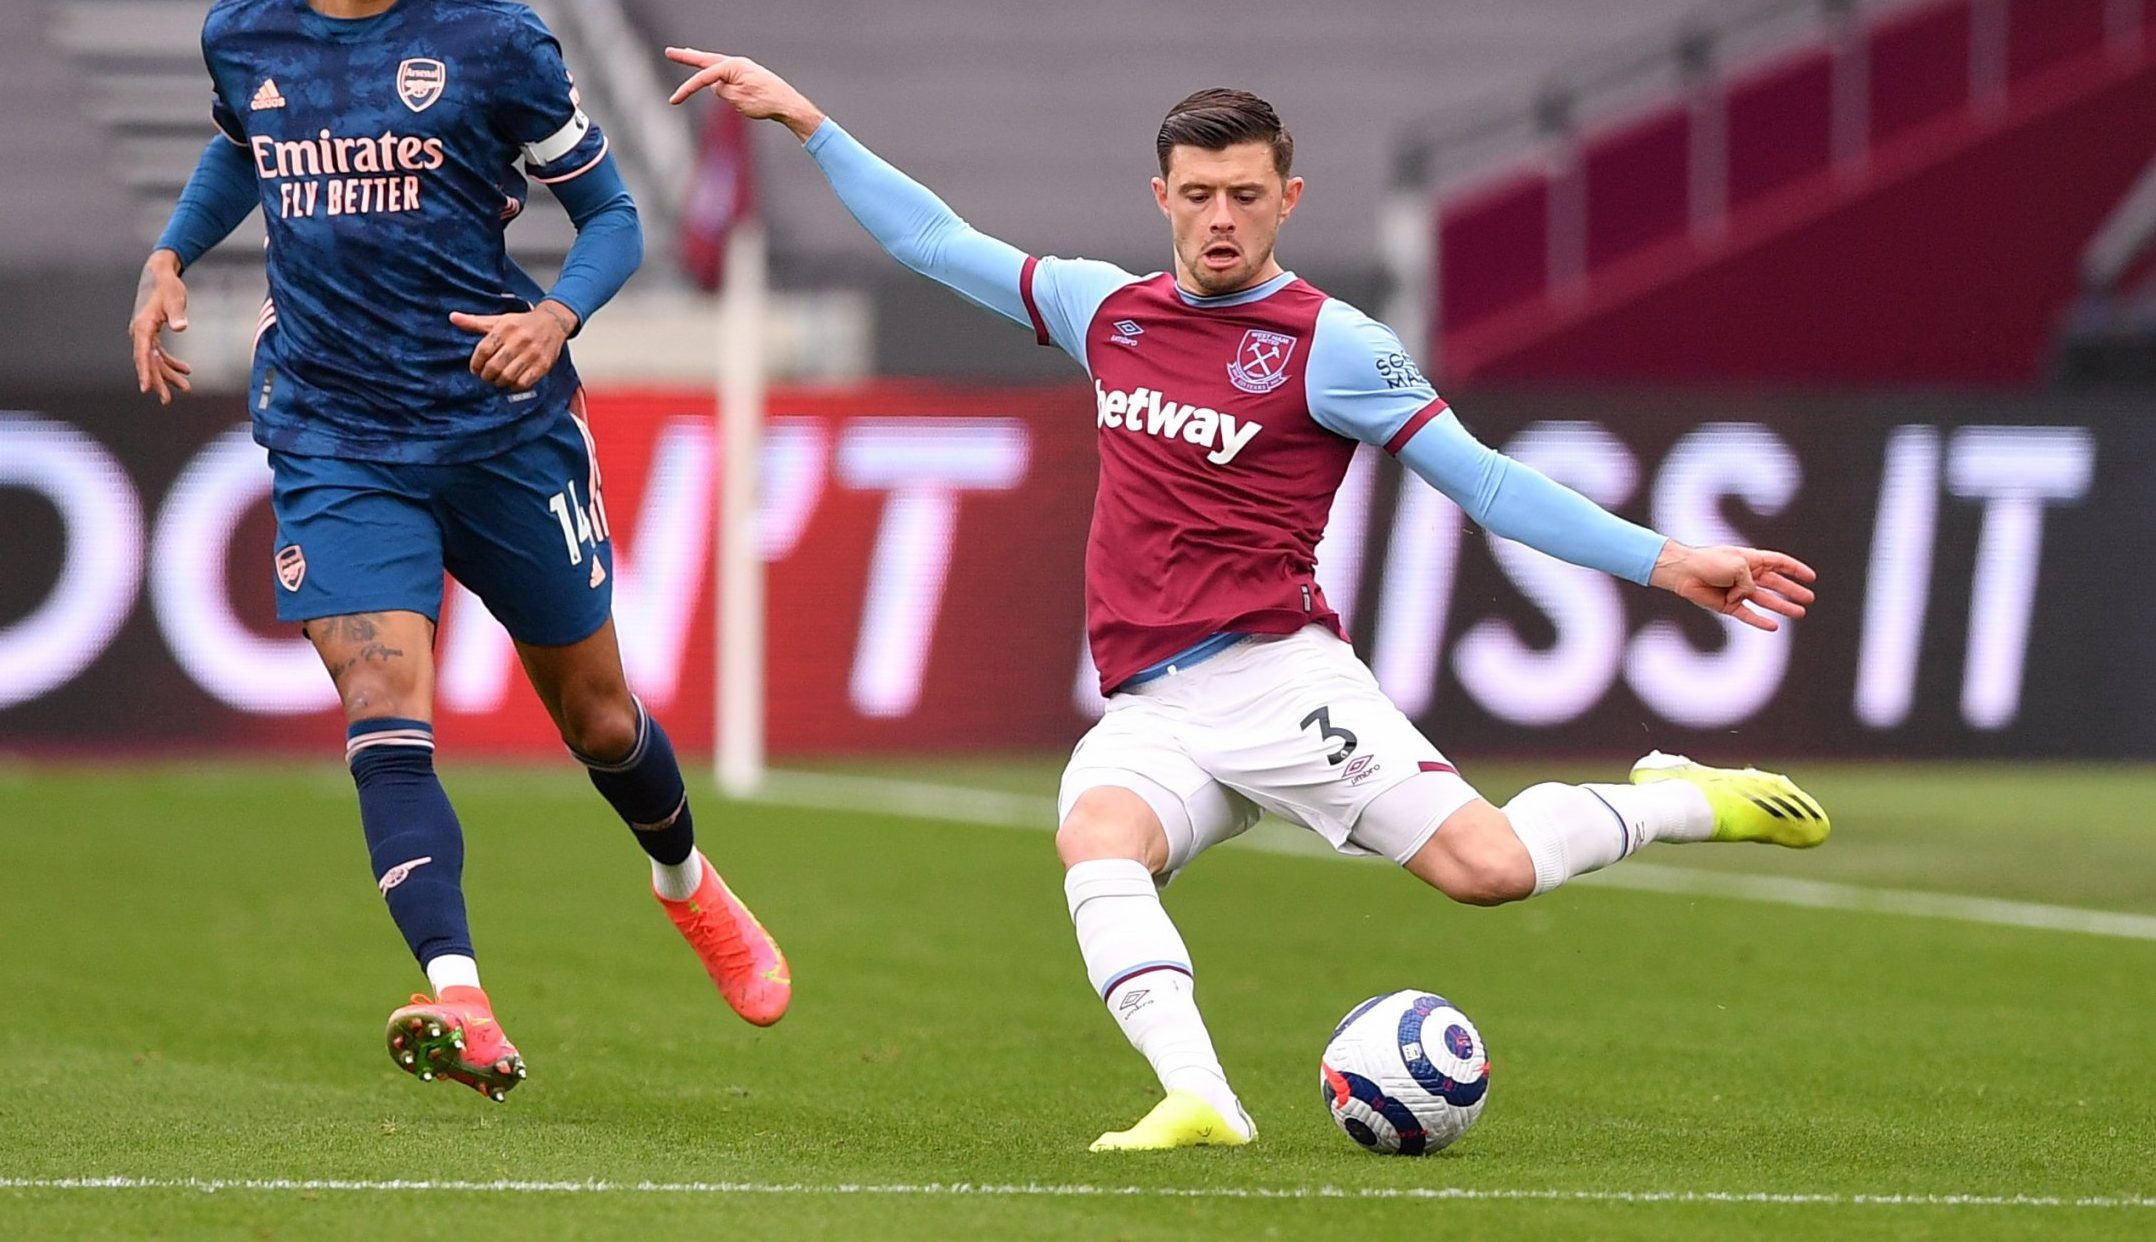 west ham defender aaron cresswell on the ball vs arsenal premier league